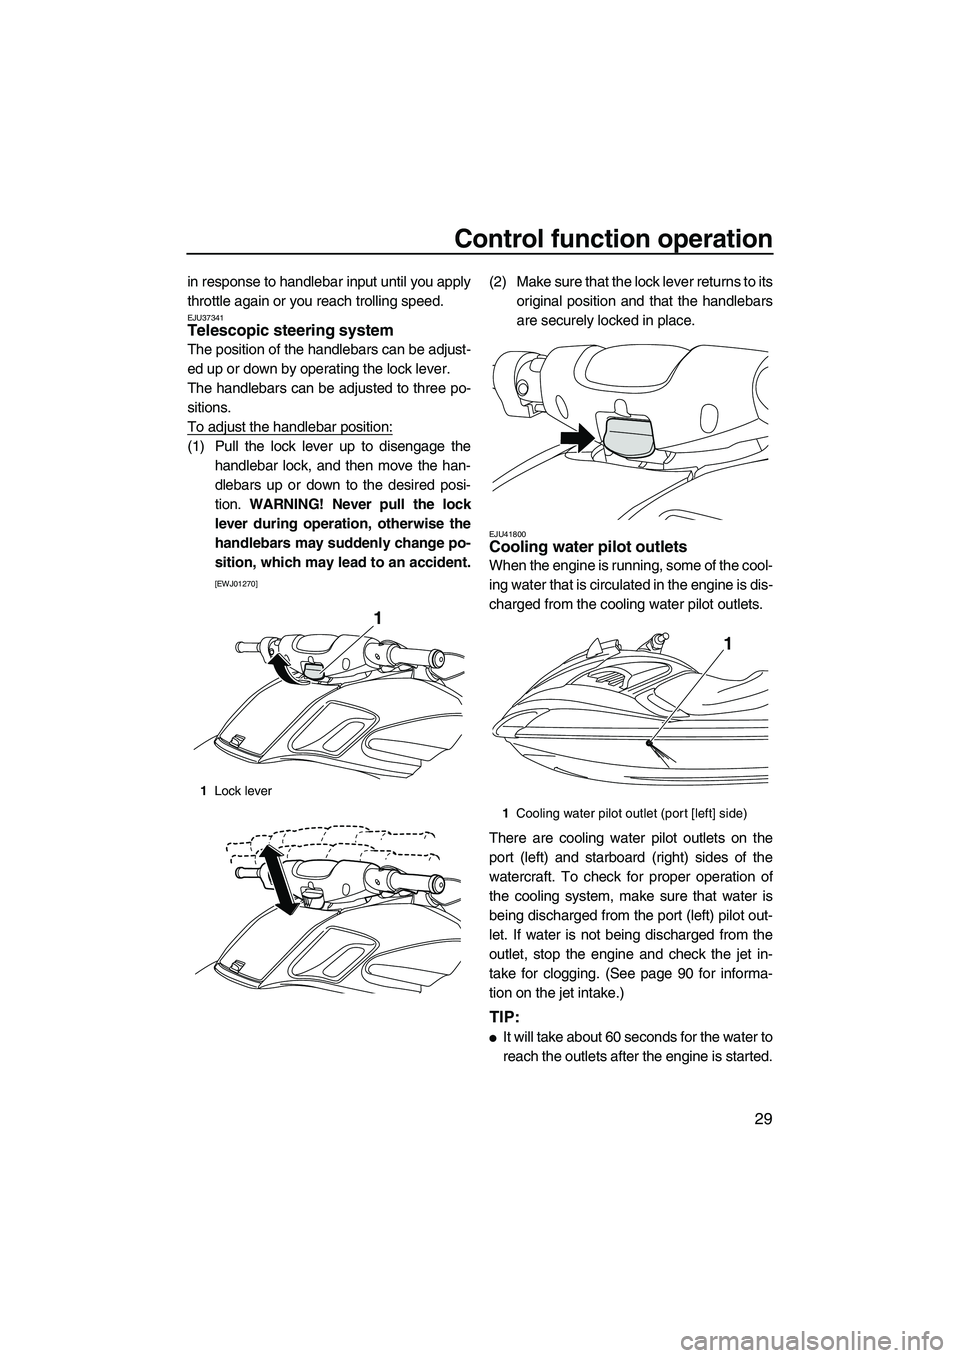 YAMAHA FZR 2012  Owners Manual Control function operation
29
in response to handlebar input until you apply
throttle again or you reach trolling speed.
EJU37341Telescopic steering system 
The position of the handlebars can be adjus